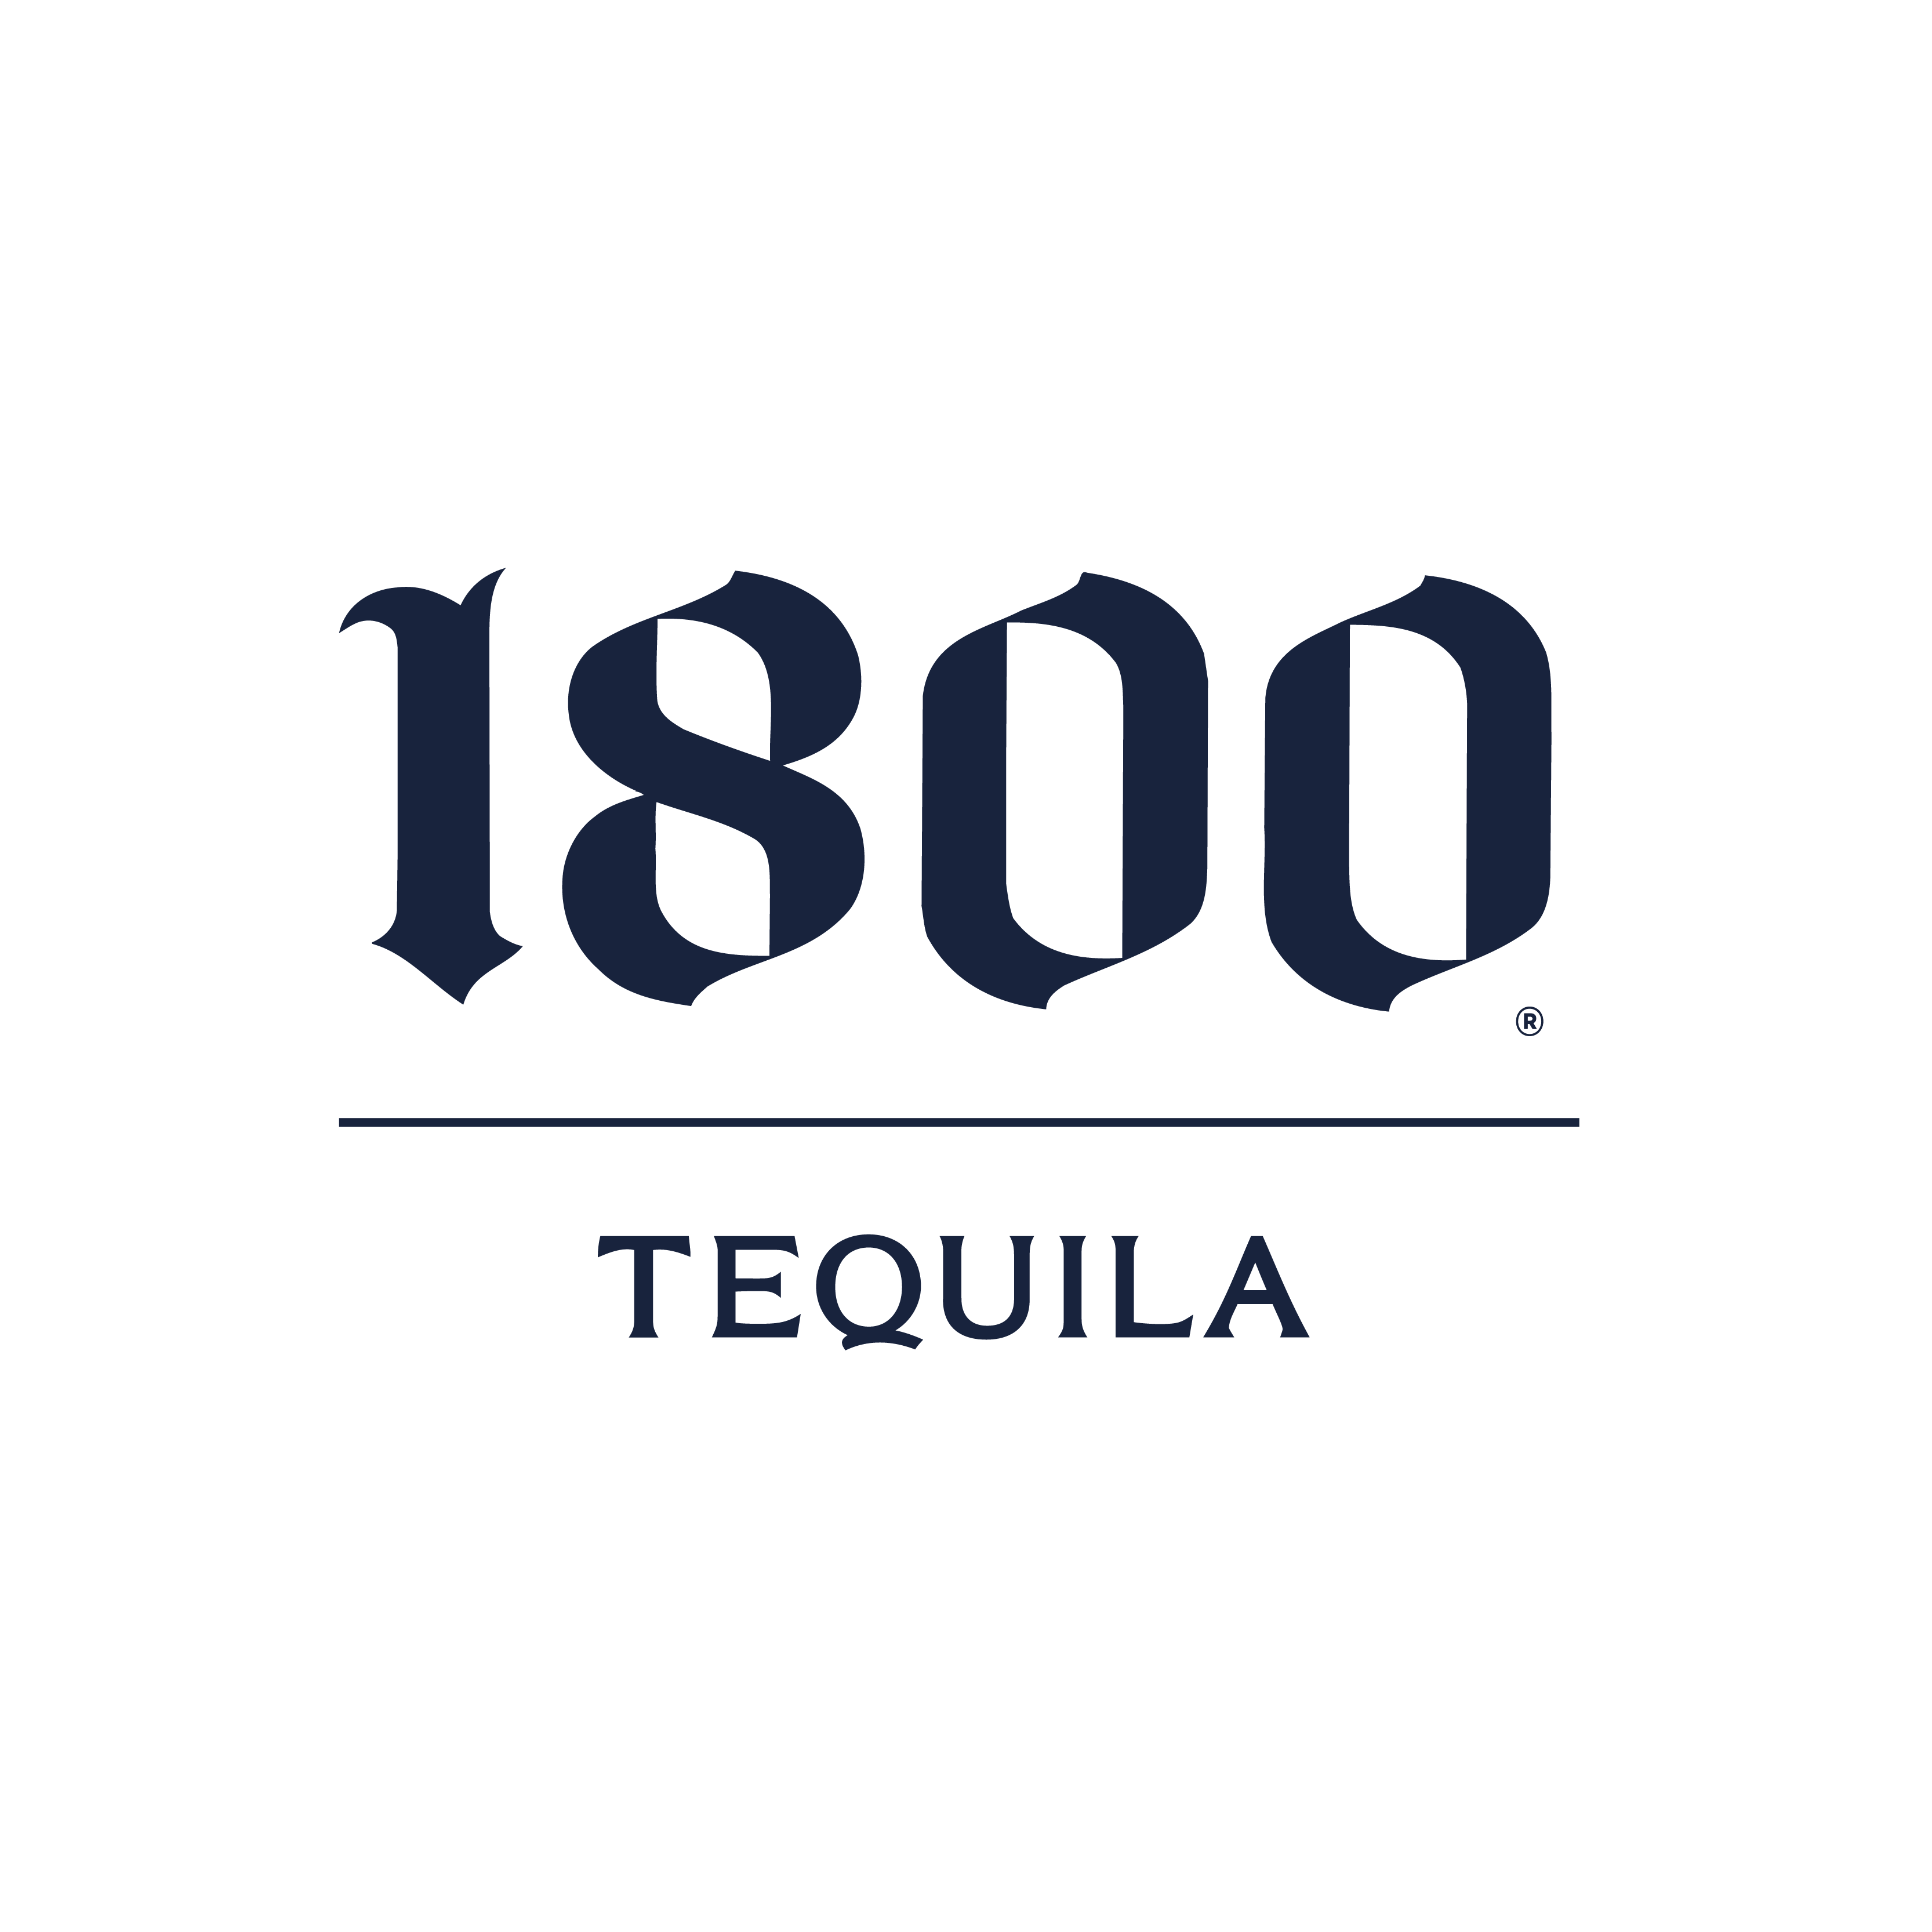 Amvyx 1800 TEQUILA